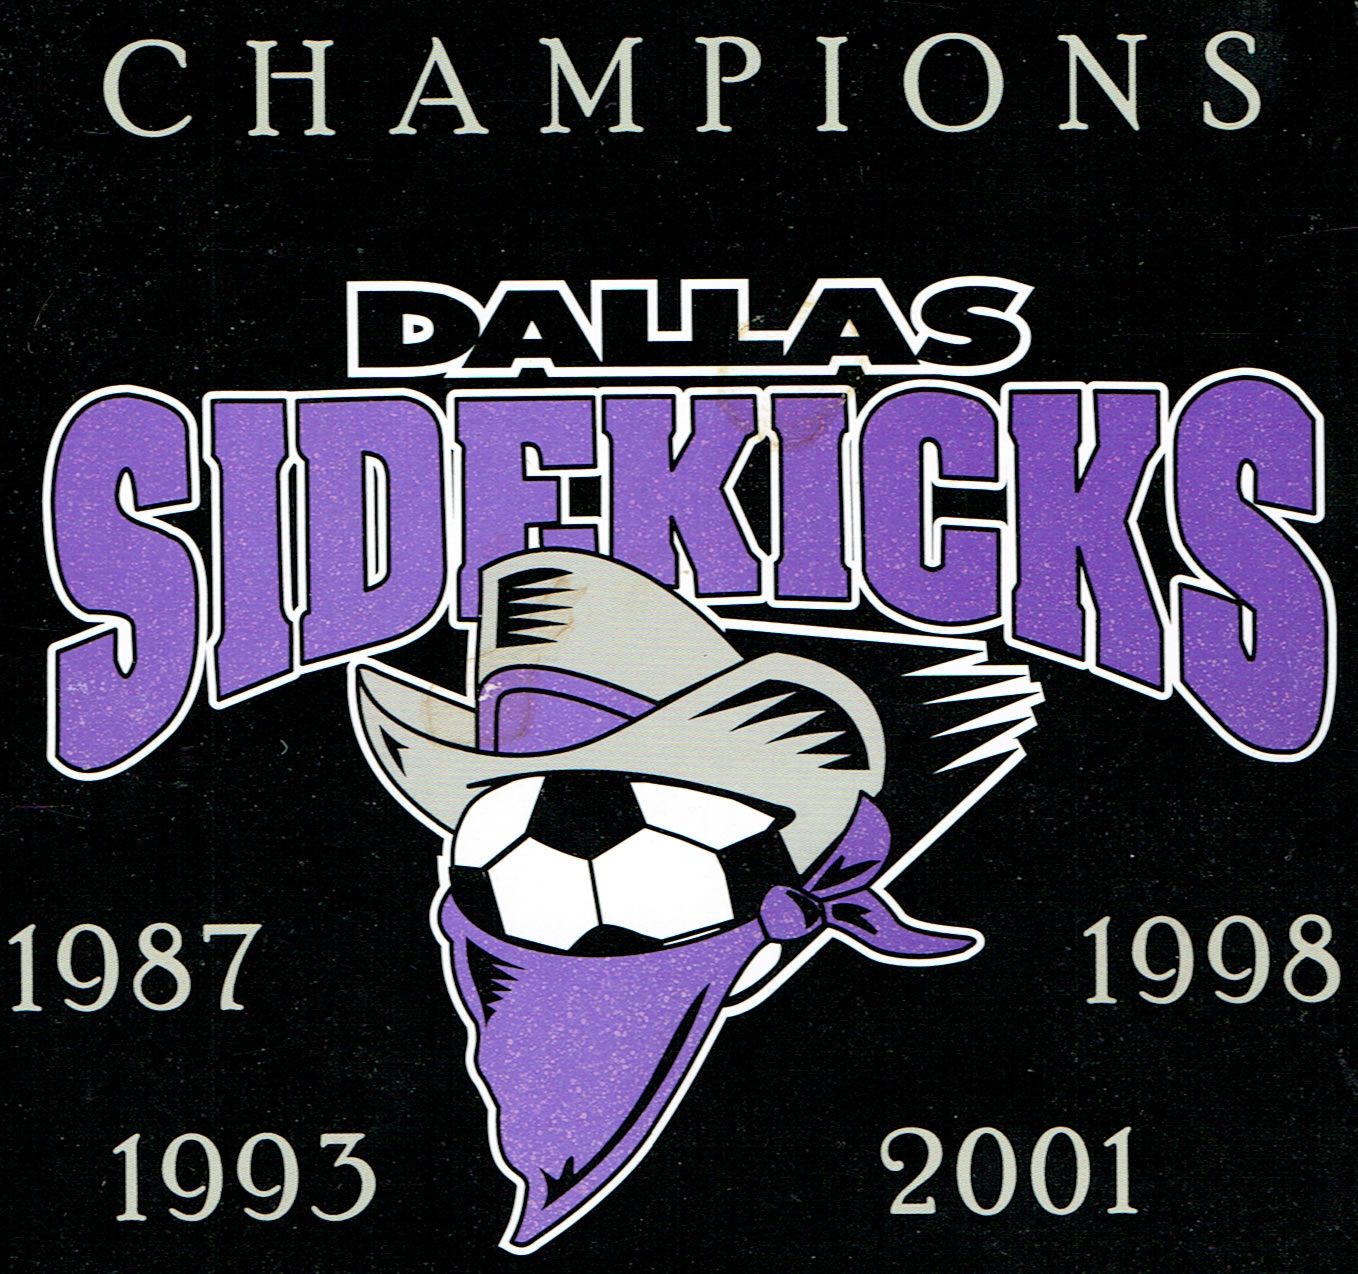 Member of the 1993, 1998, and 2001 Championshio teams

